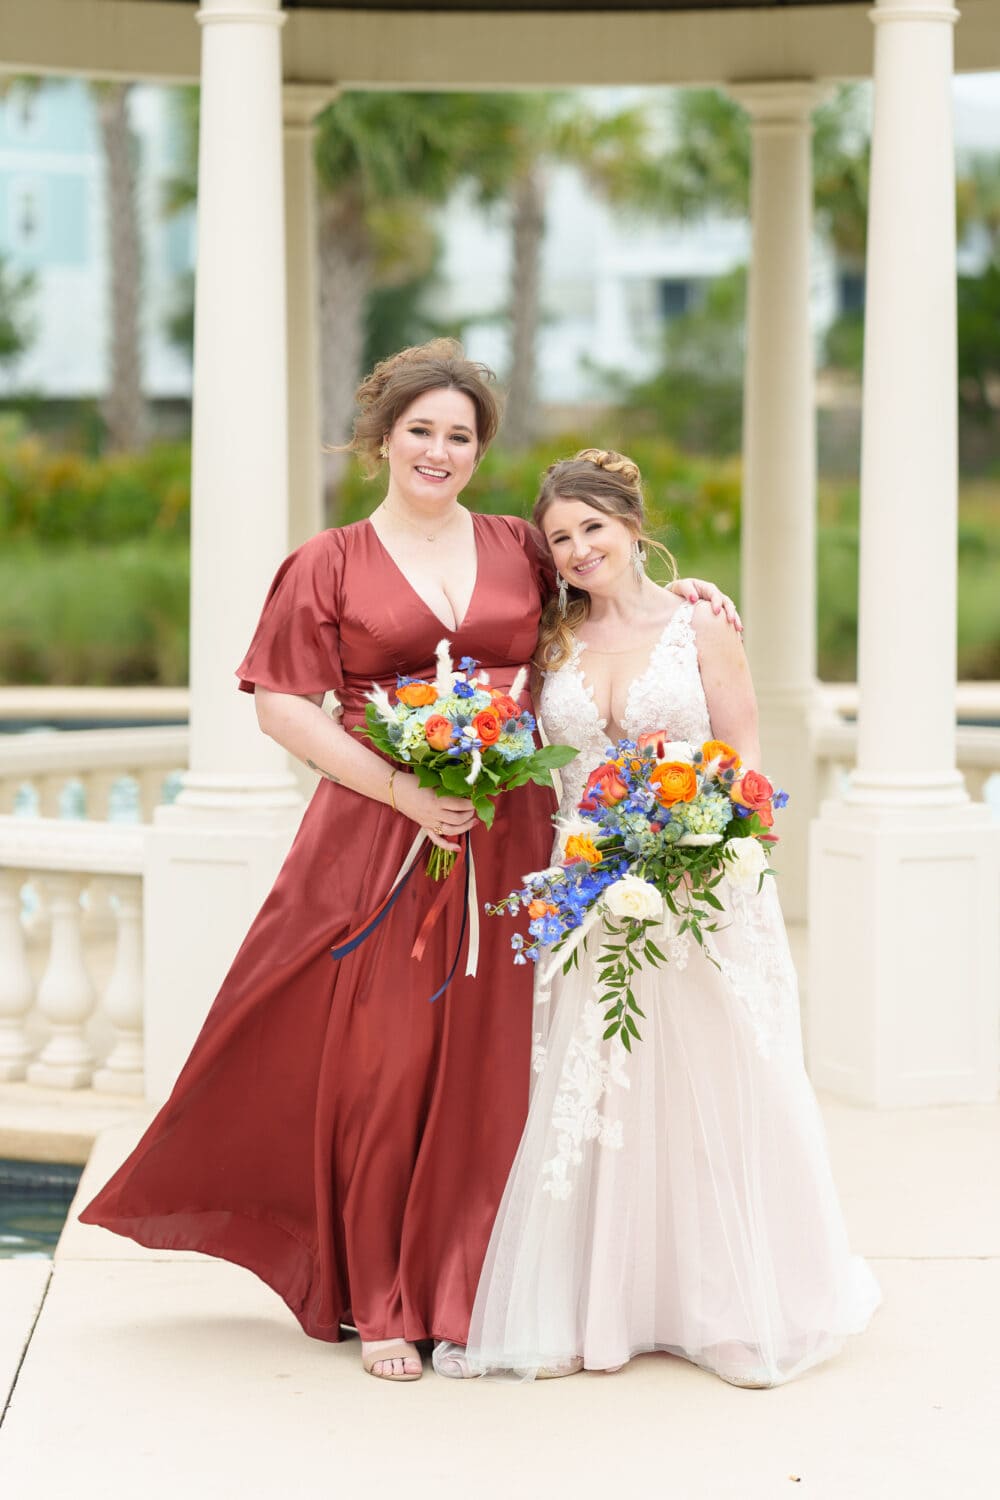 Bride with her sister - 21 Main Events - North Myrtle Beach